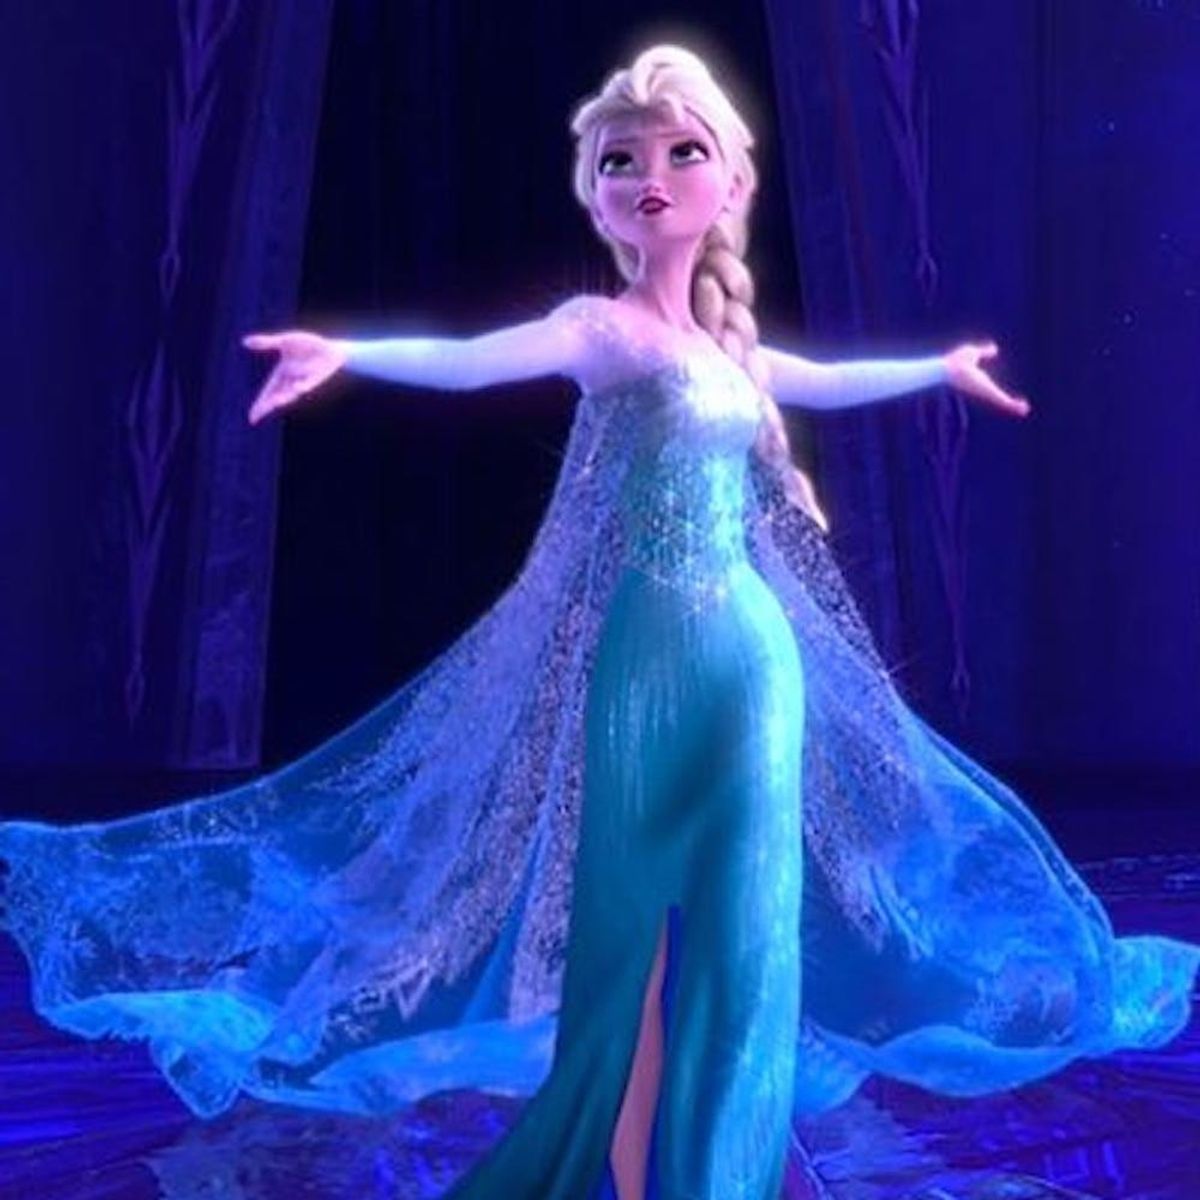 Here’s Your First Look at the Cast of “Frozen: (The Musical)” in Full Costume